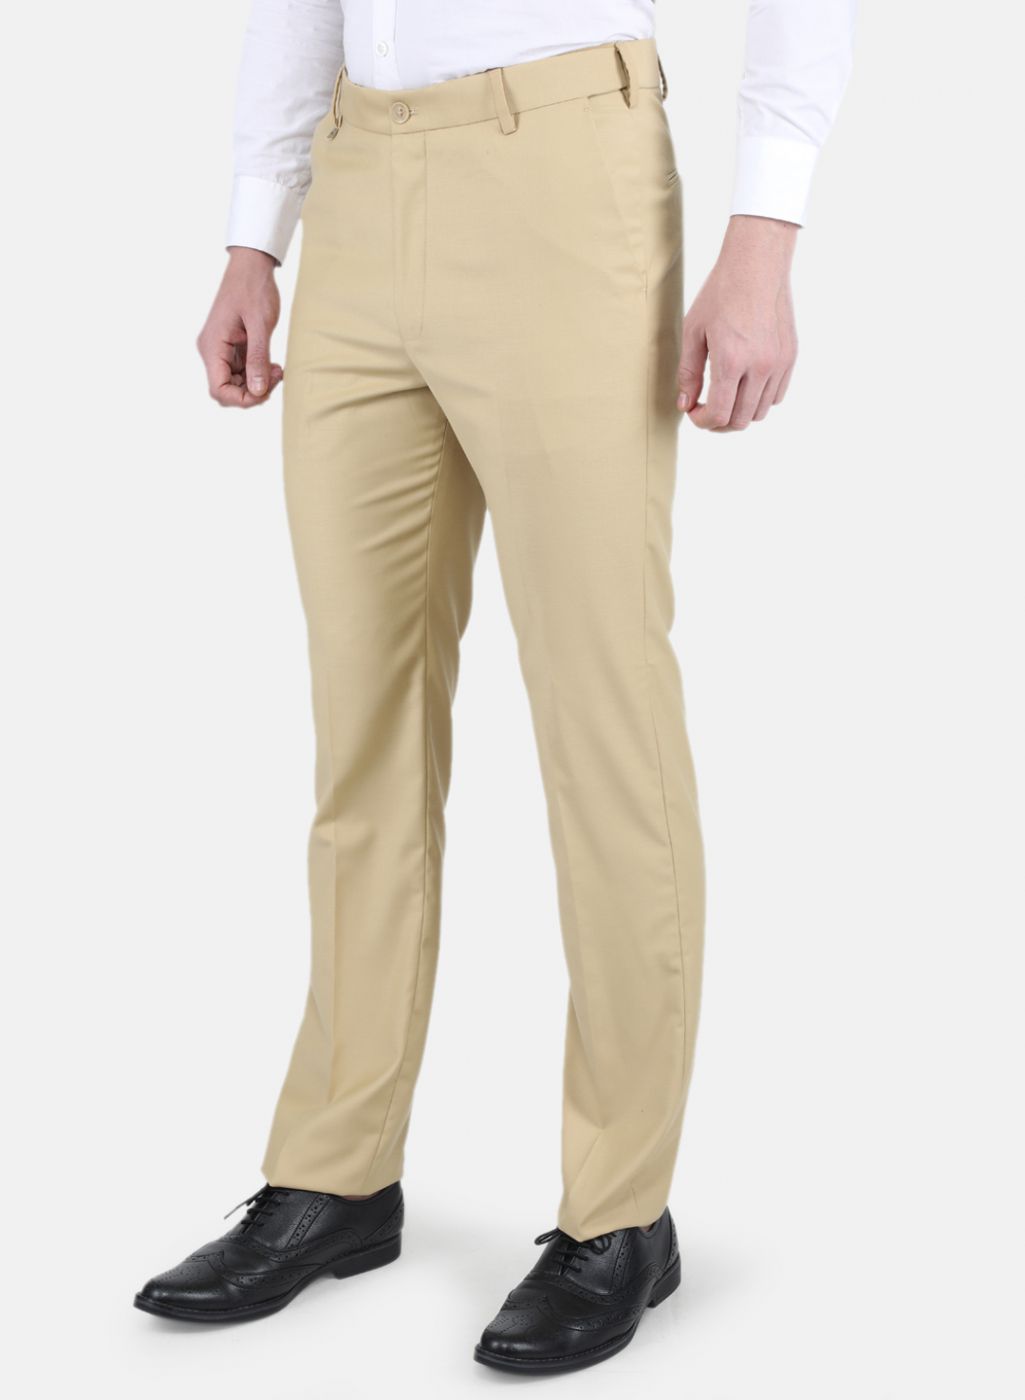 Men Grey Cotton Formal Pant, Regular Fit at Rs 700 in Indore | ID:  23343924988